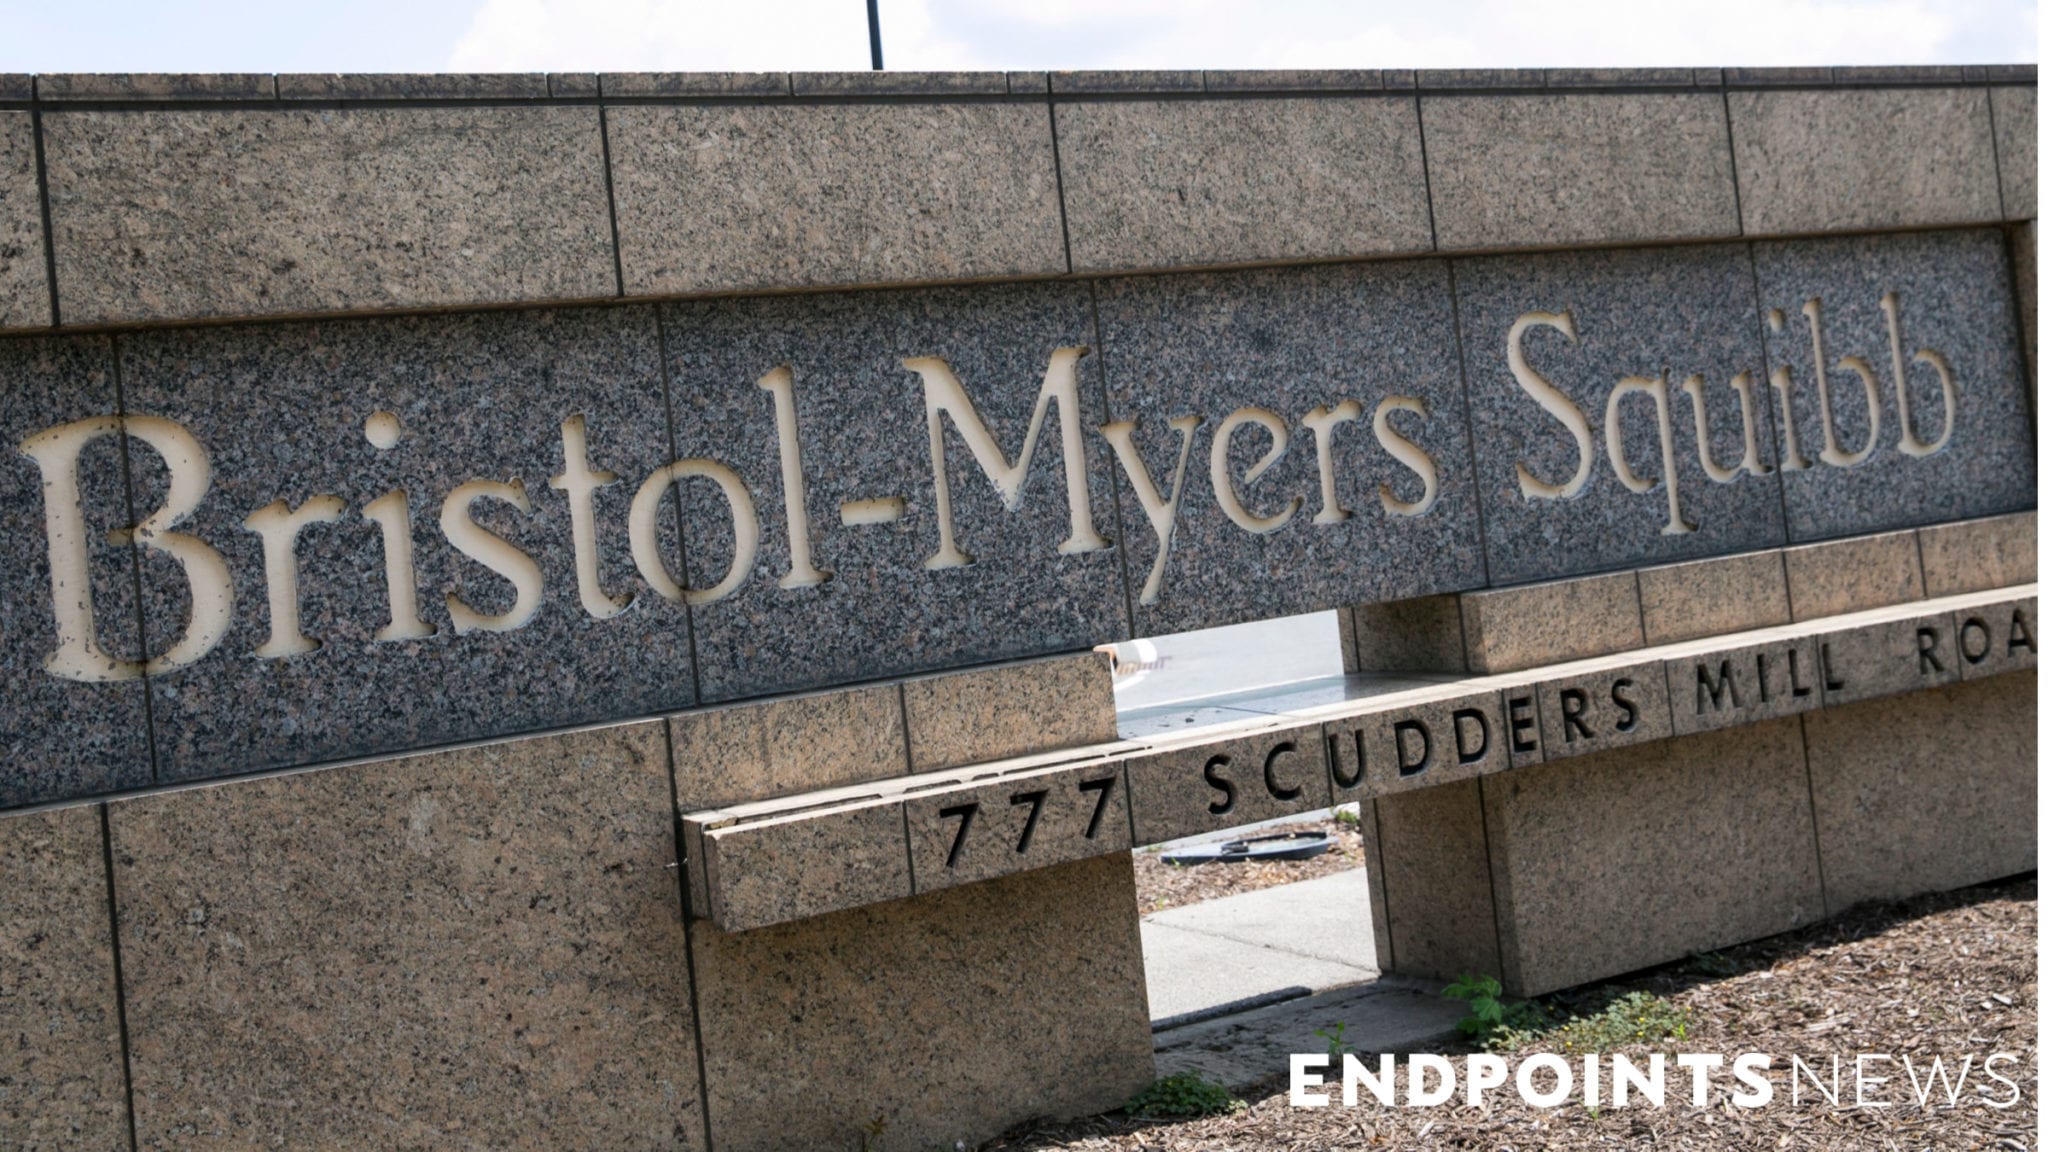 Bristol Myers Squibb receives long-awaited FDA approval for lyso-cel, joining the list of lymphoma CAR-T winners – Endpoints News